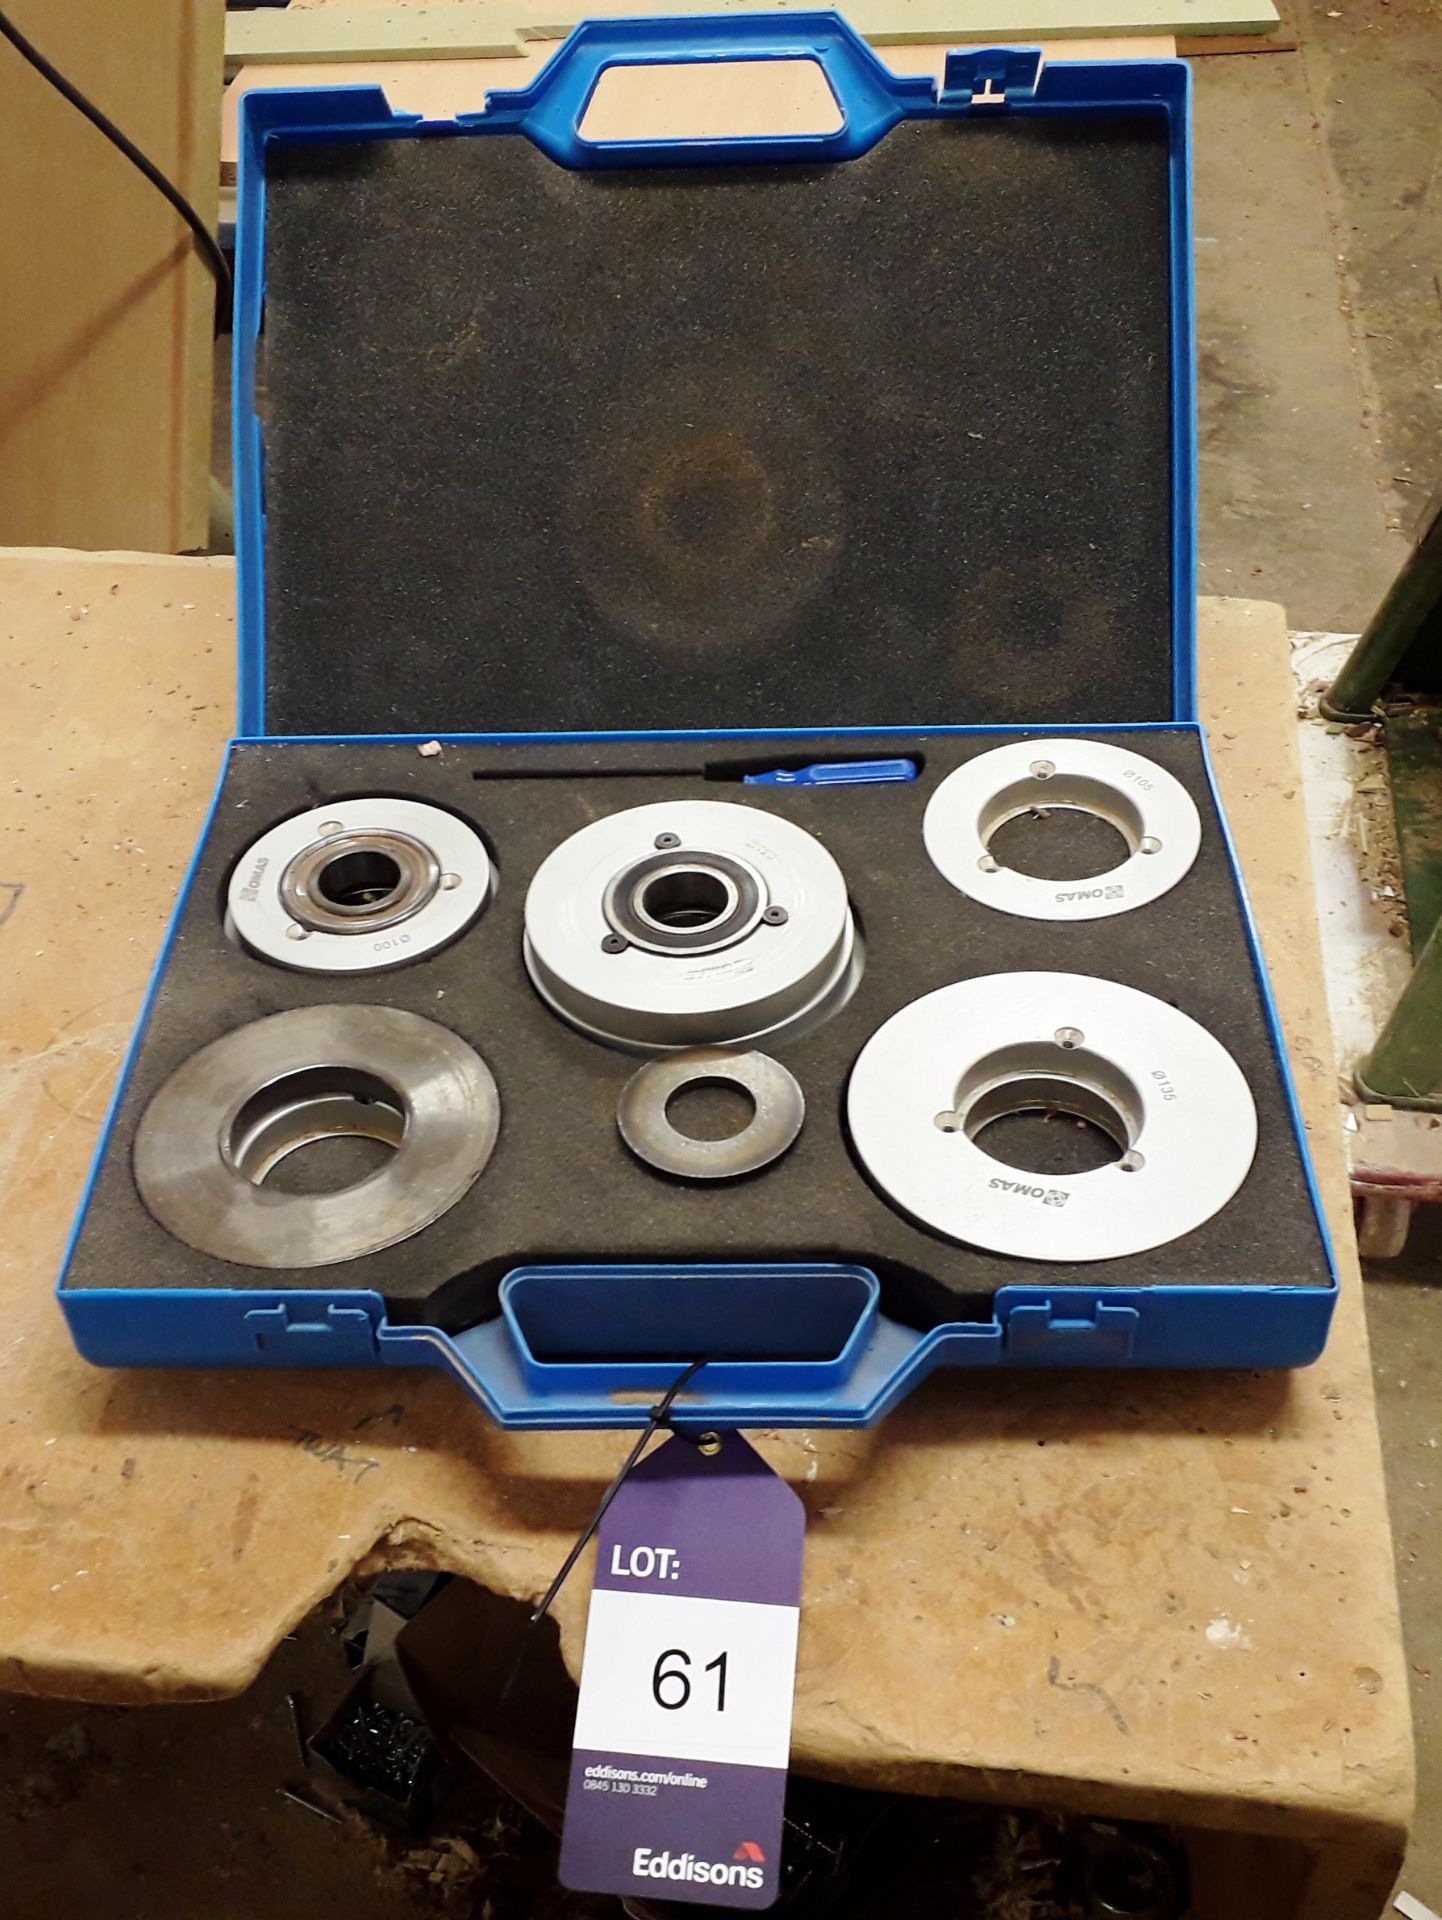 Set of Omas Precision Spindle Moulder Space Tooling